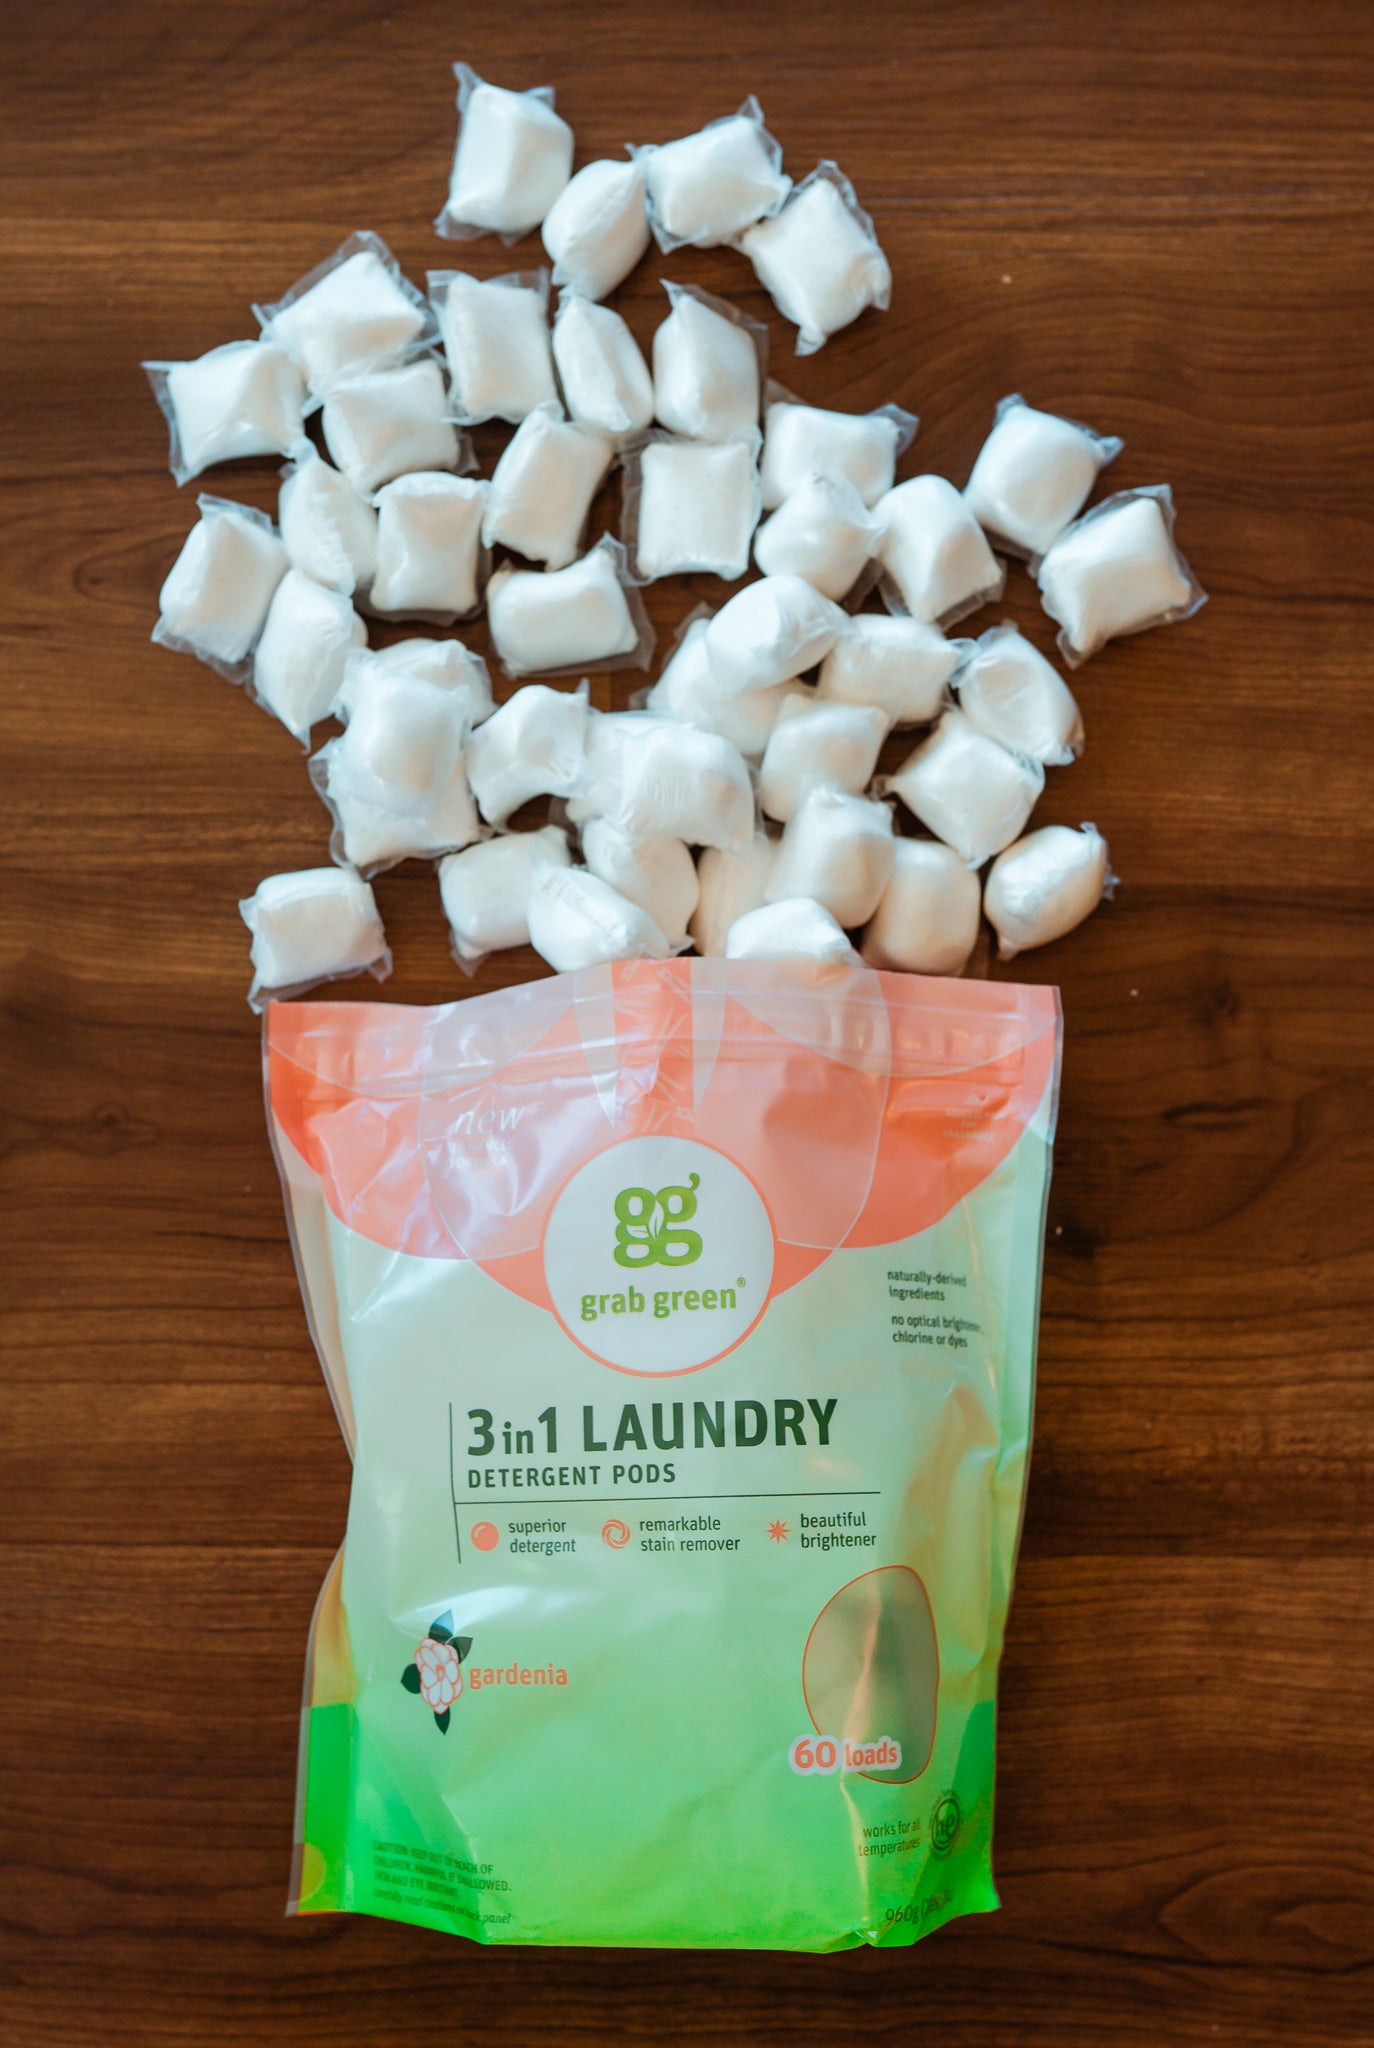 The Environmental Impact of Laundry Detergent: How to Make a Greener Choice